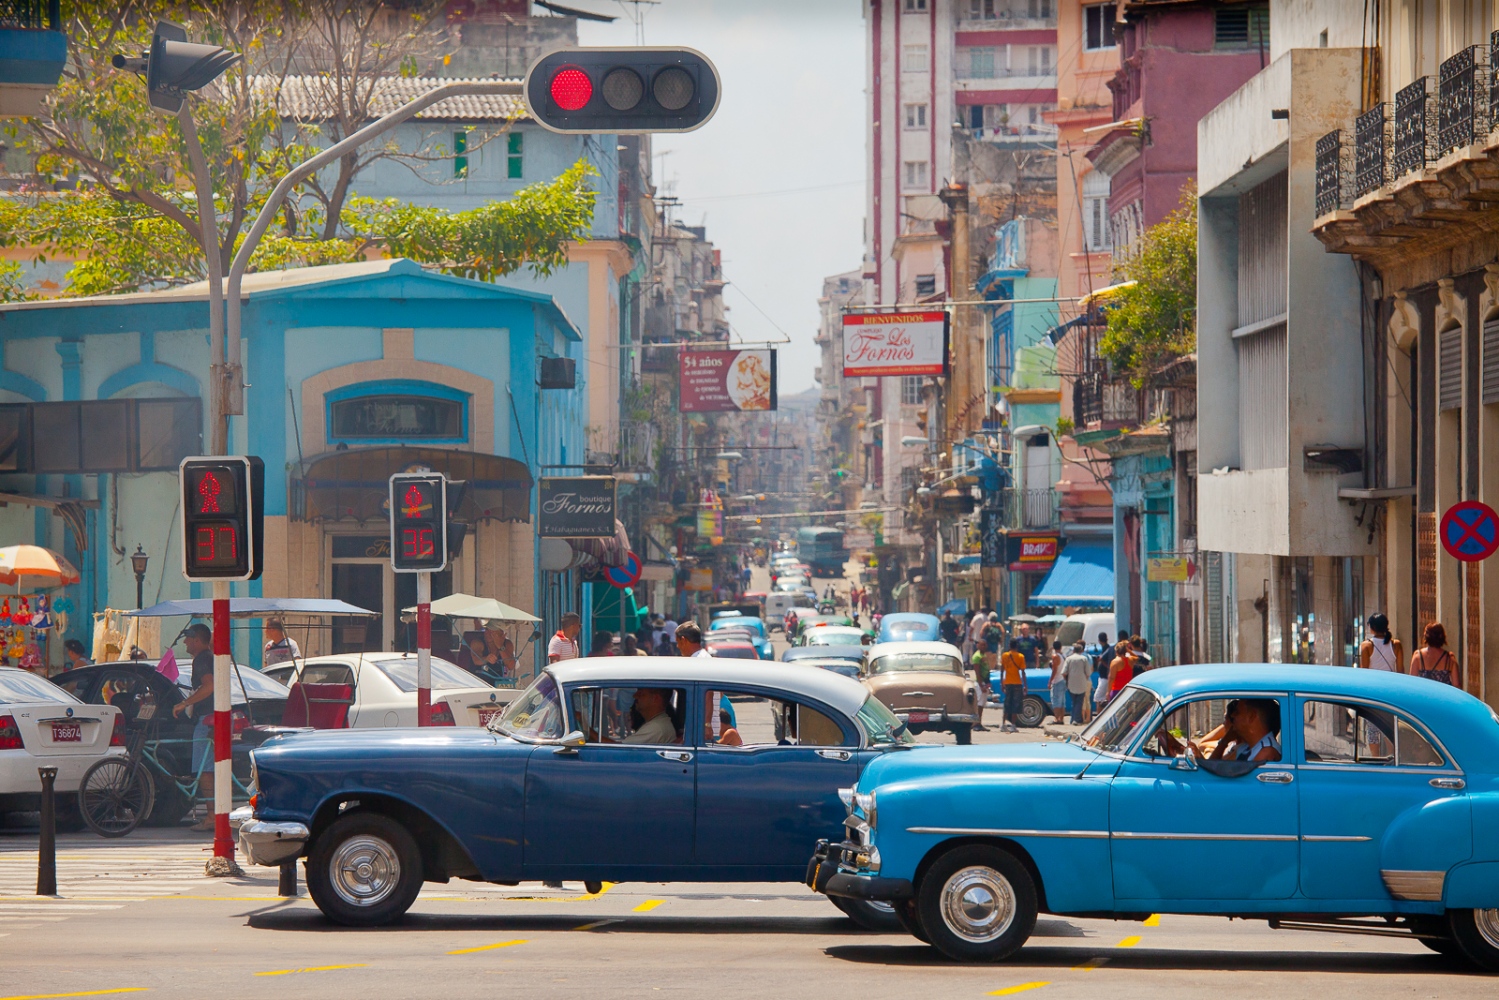 1950s era vehicles are ubiquitous on Cuban streets. Most are cannabilized with parts from many...